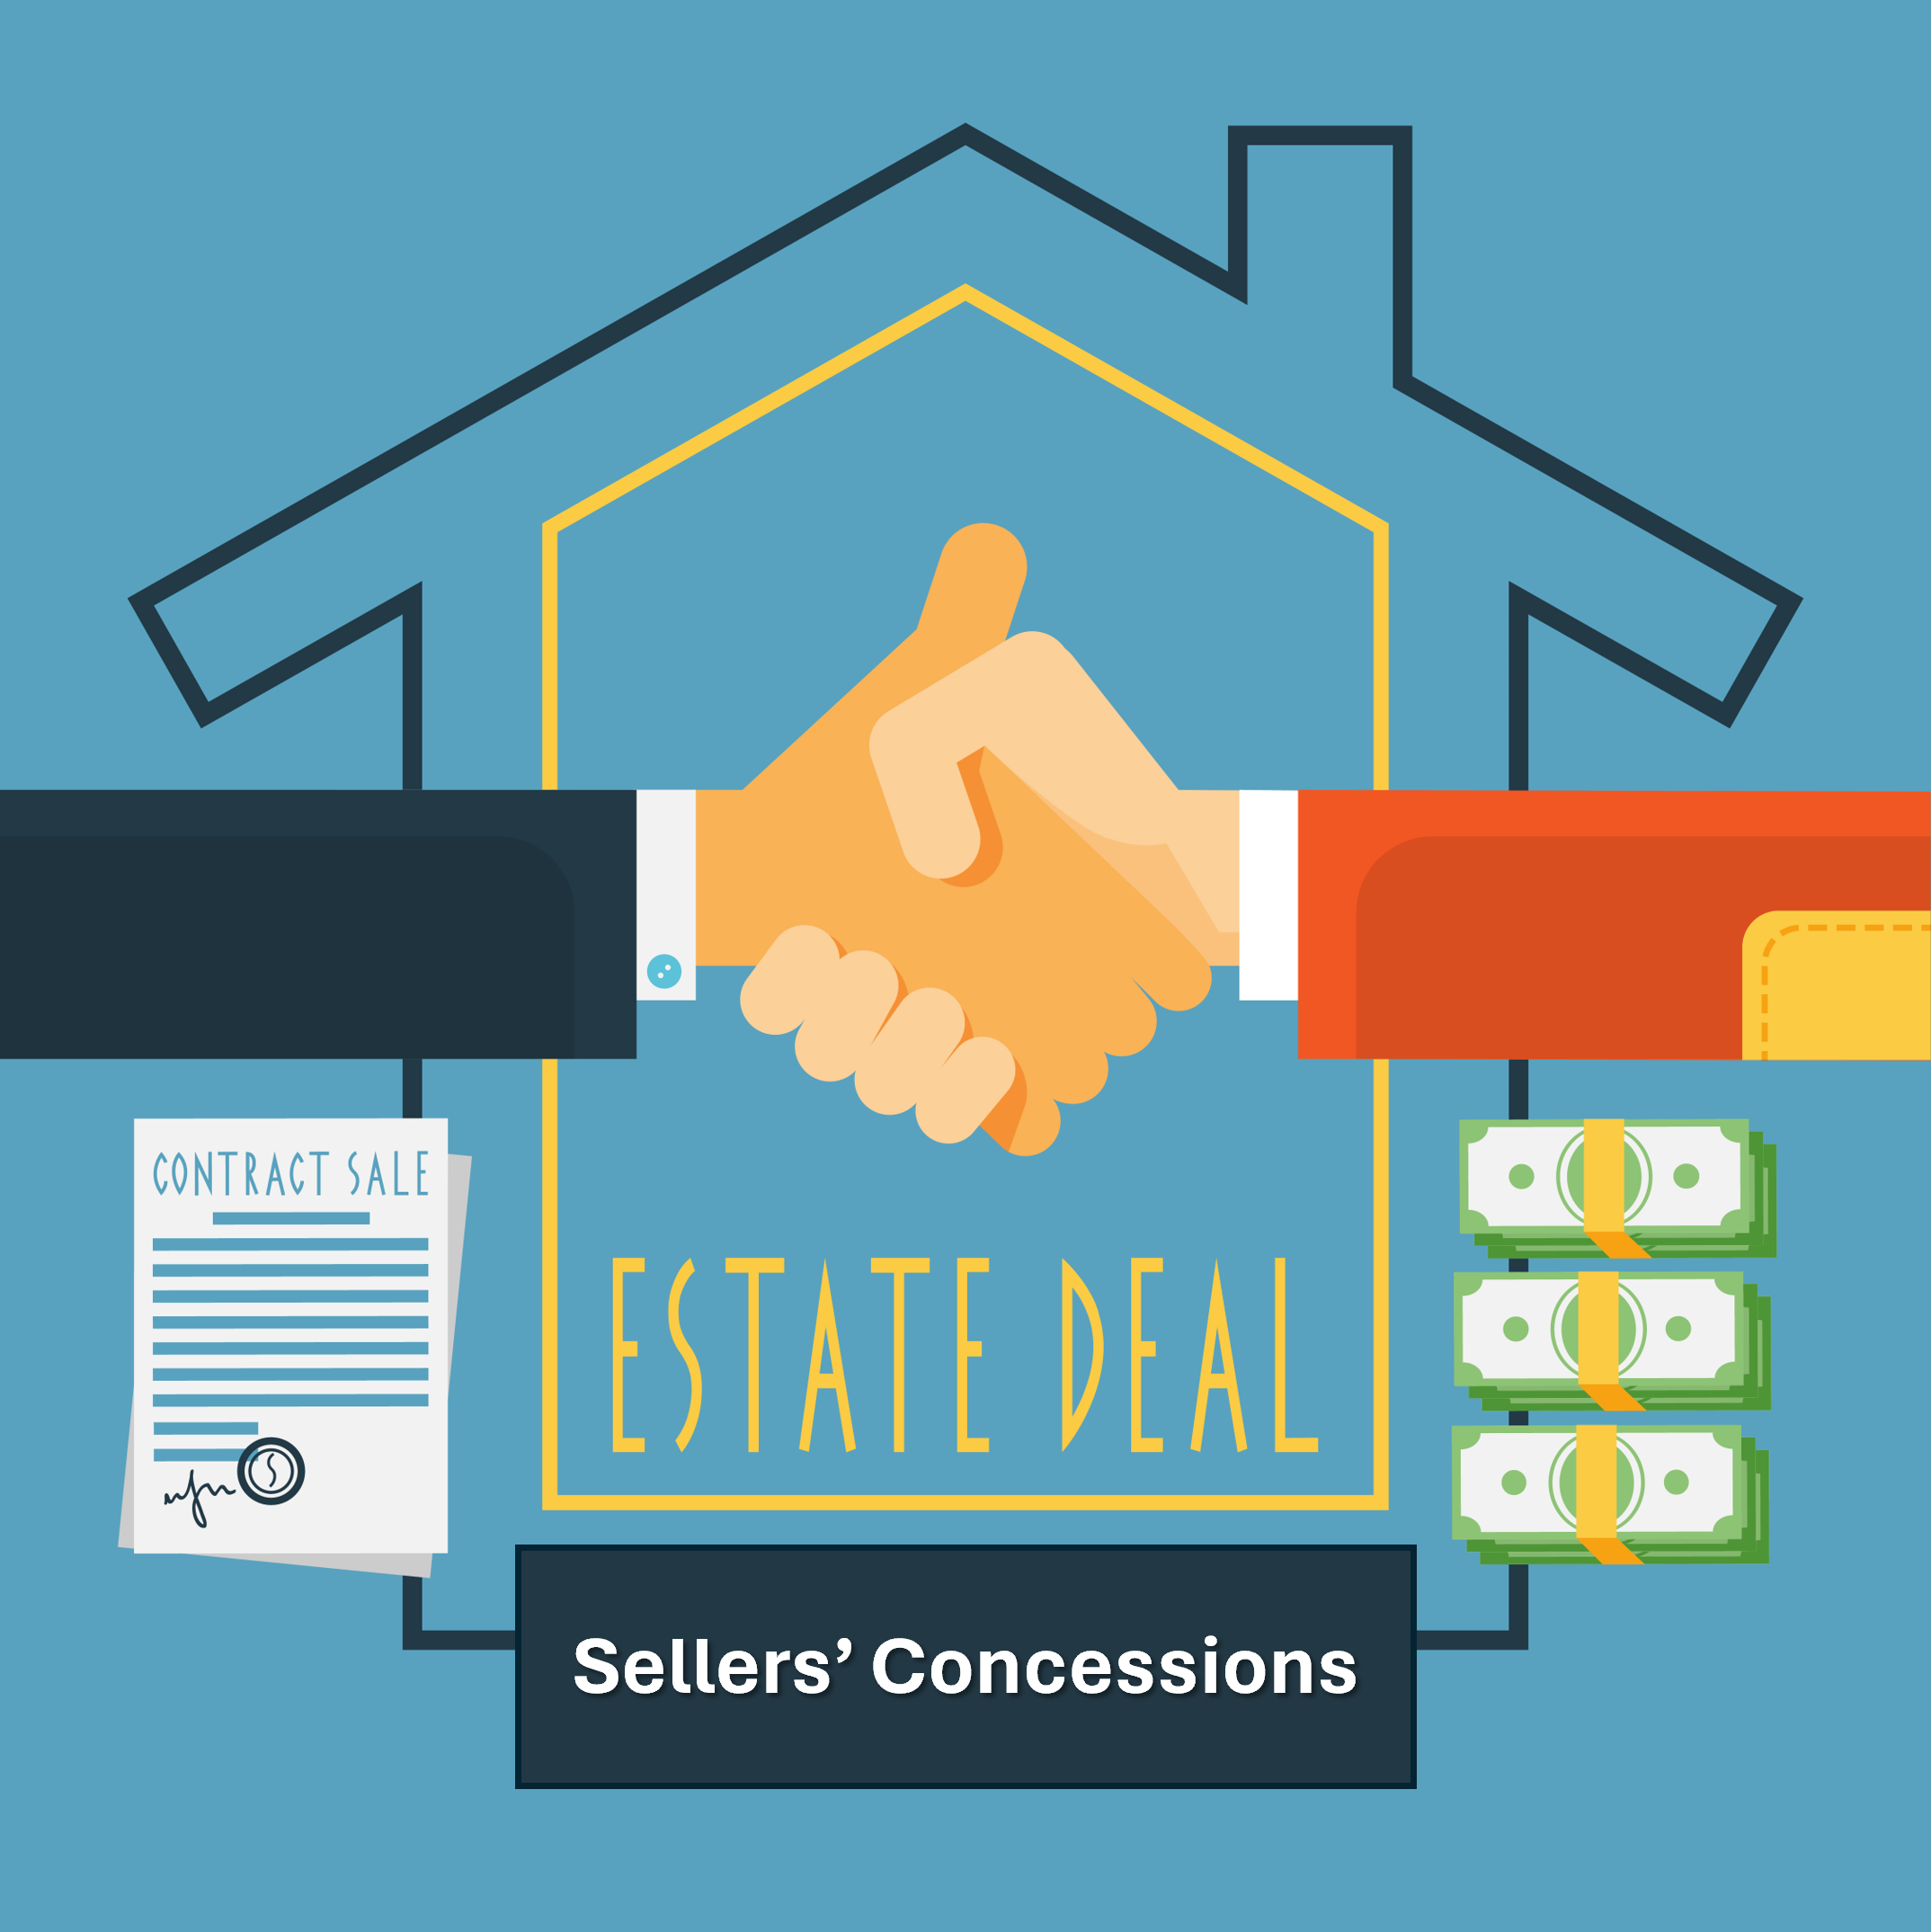 What are Seller Concessions?